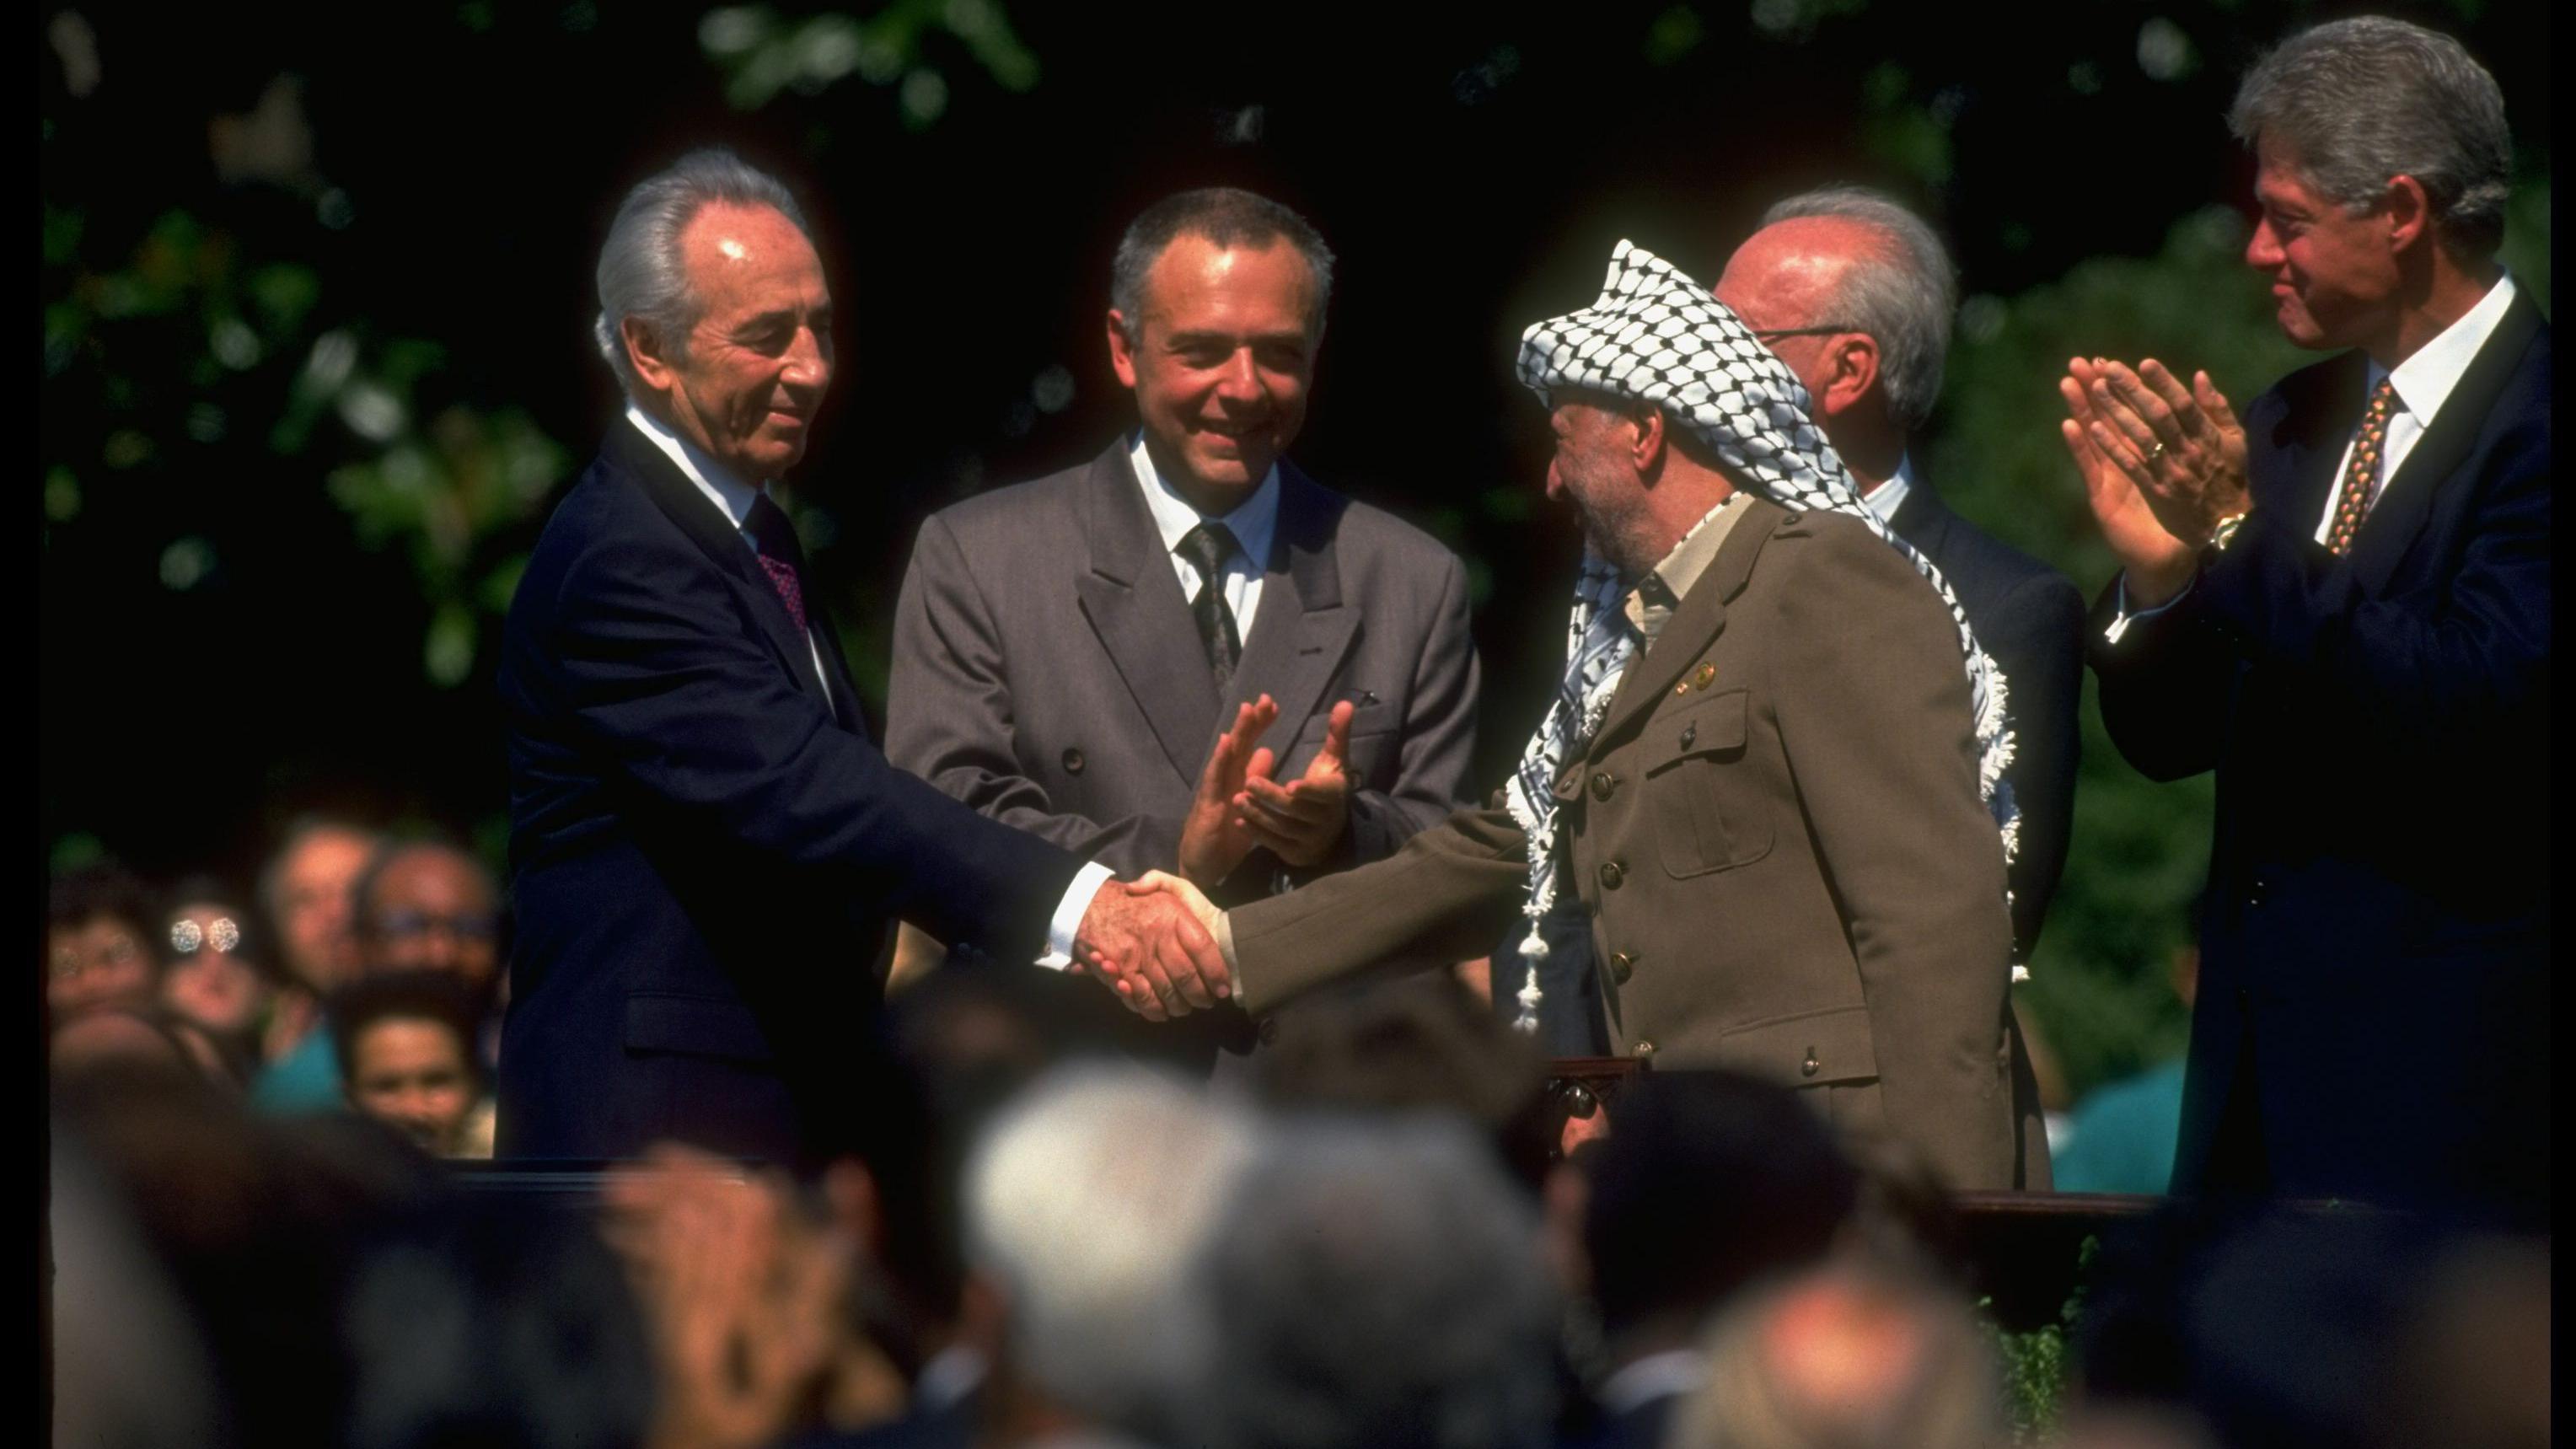 PLO leader Yasser Arafat (Right) dey shake hand wit Israeli foreign minister Shimon Peres for di Oslo Accord signing wit US President Bill Clinton (Far right) wey dey clap im hands